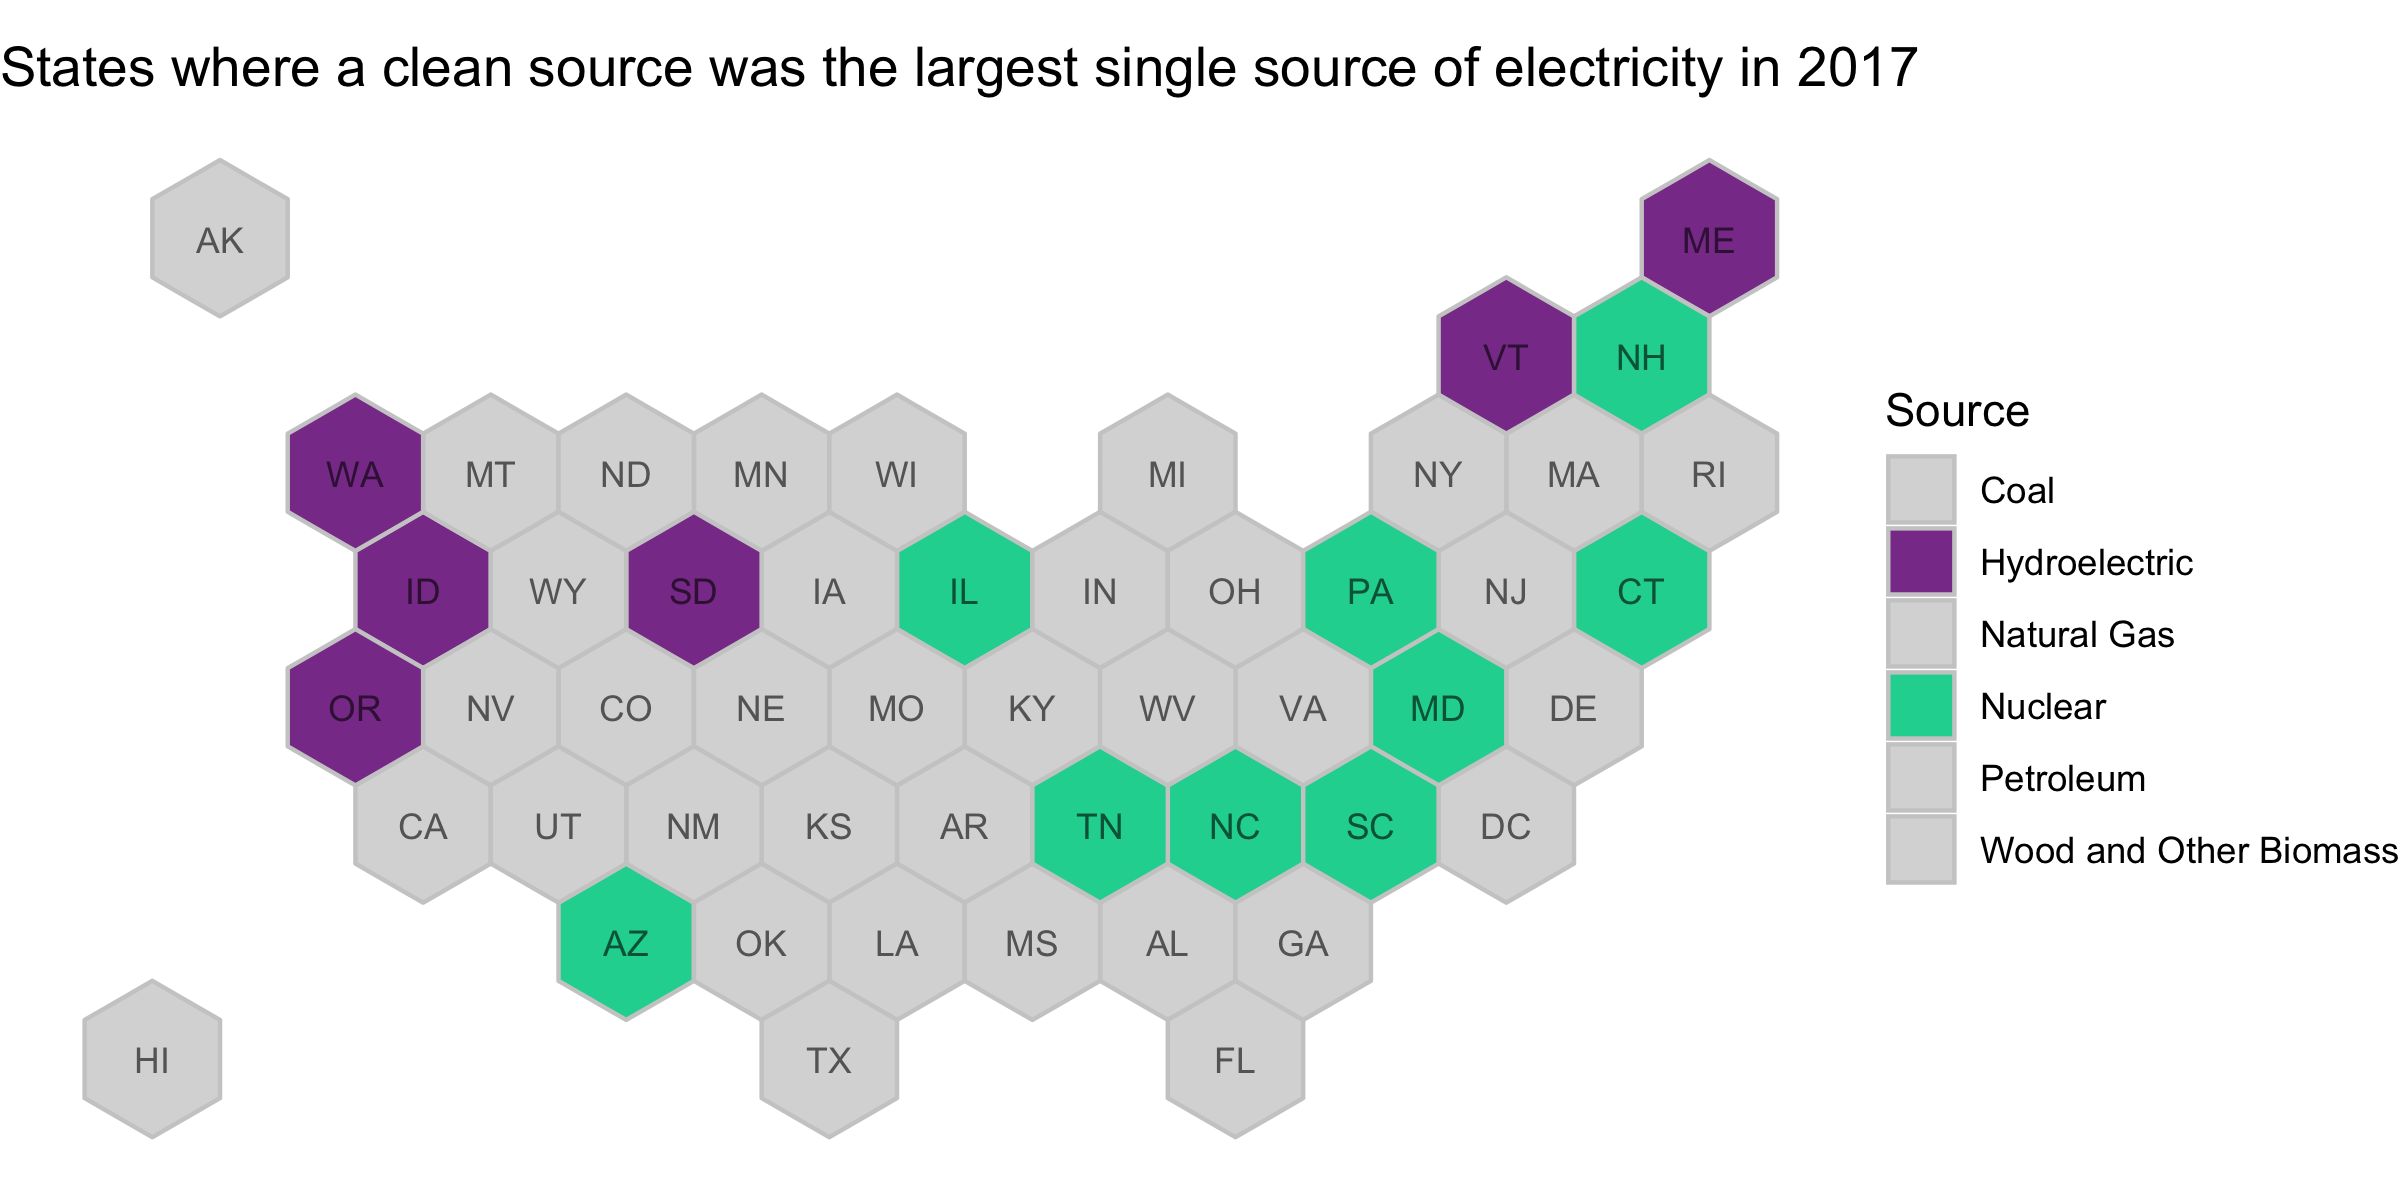 states where a clean source was the largest single source of electricity